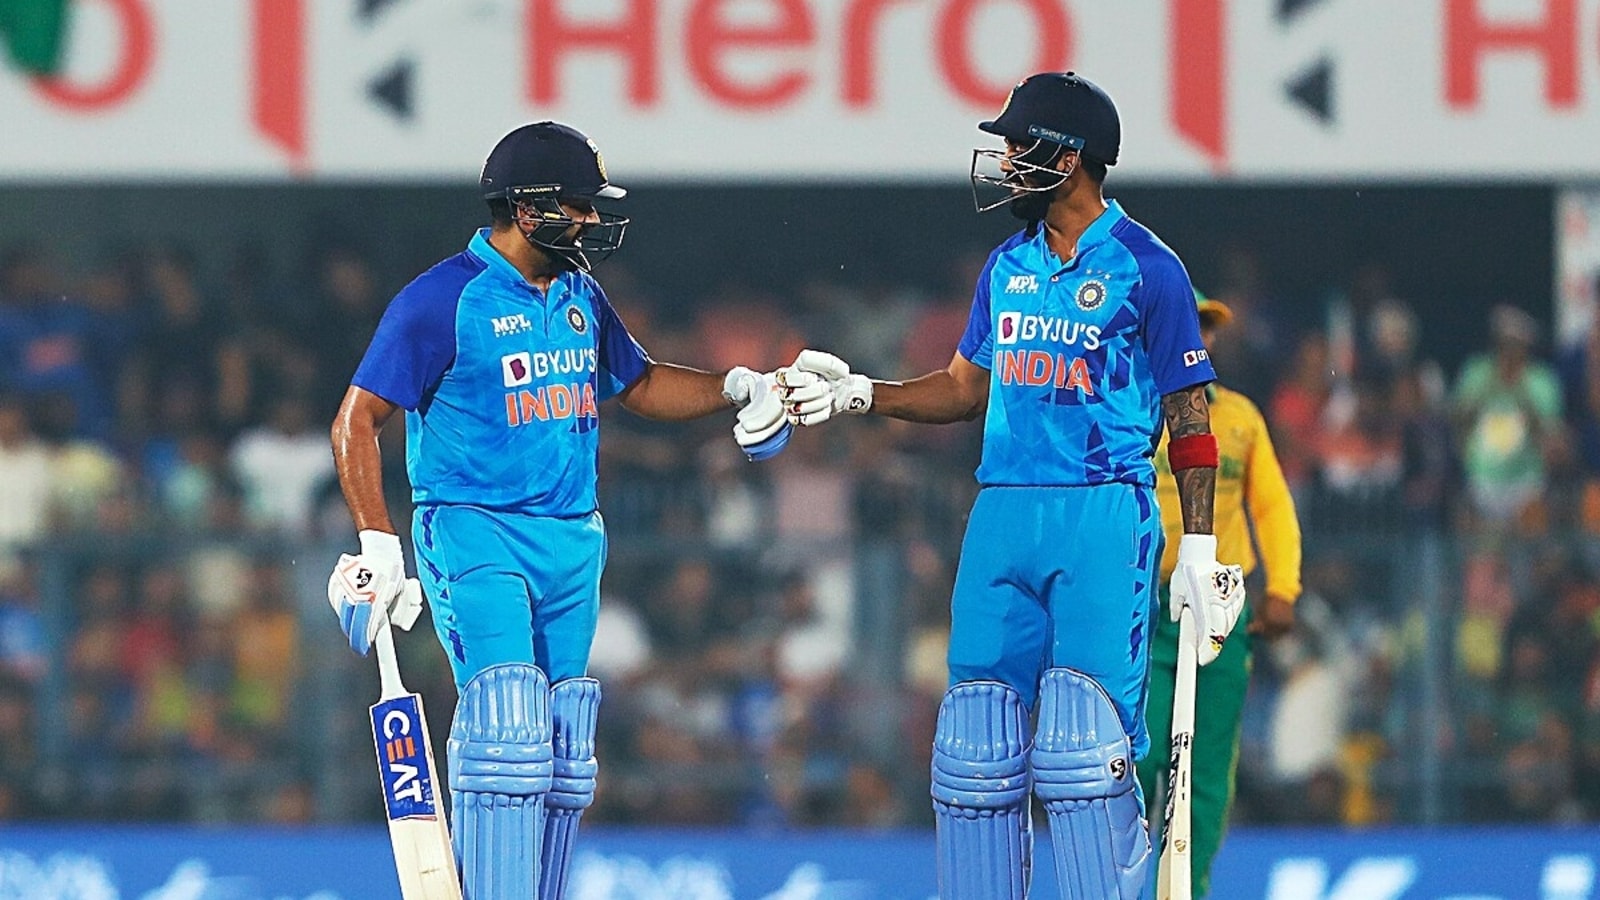 India vs Western Australia warm-up match live streaming All you need to know Cricket